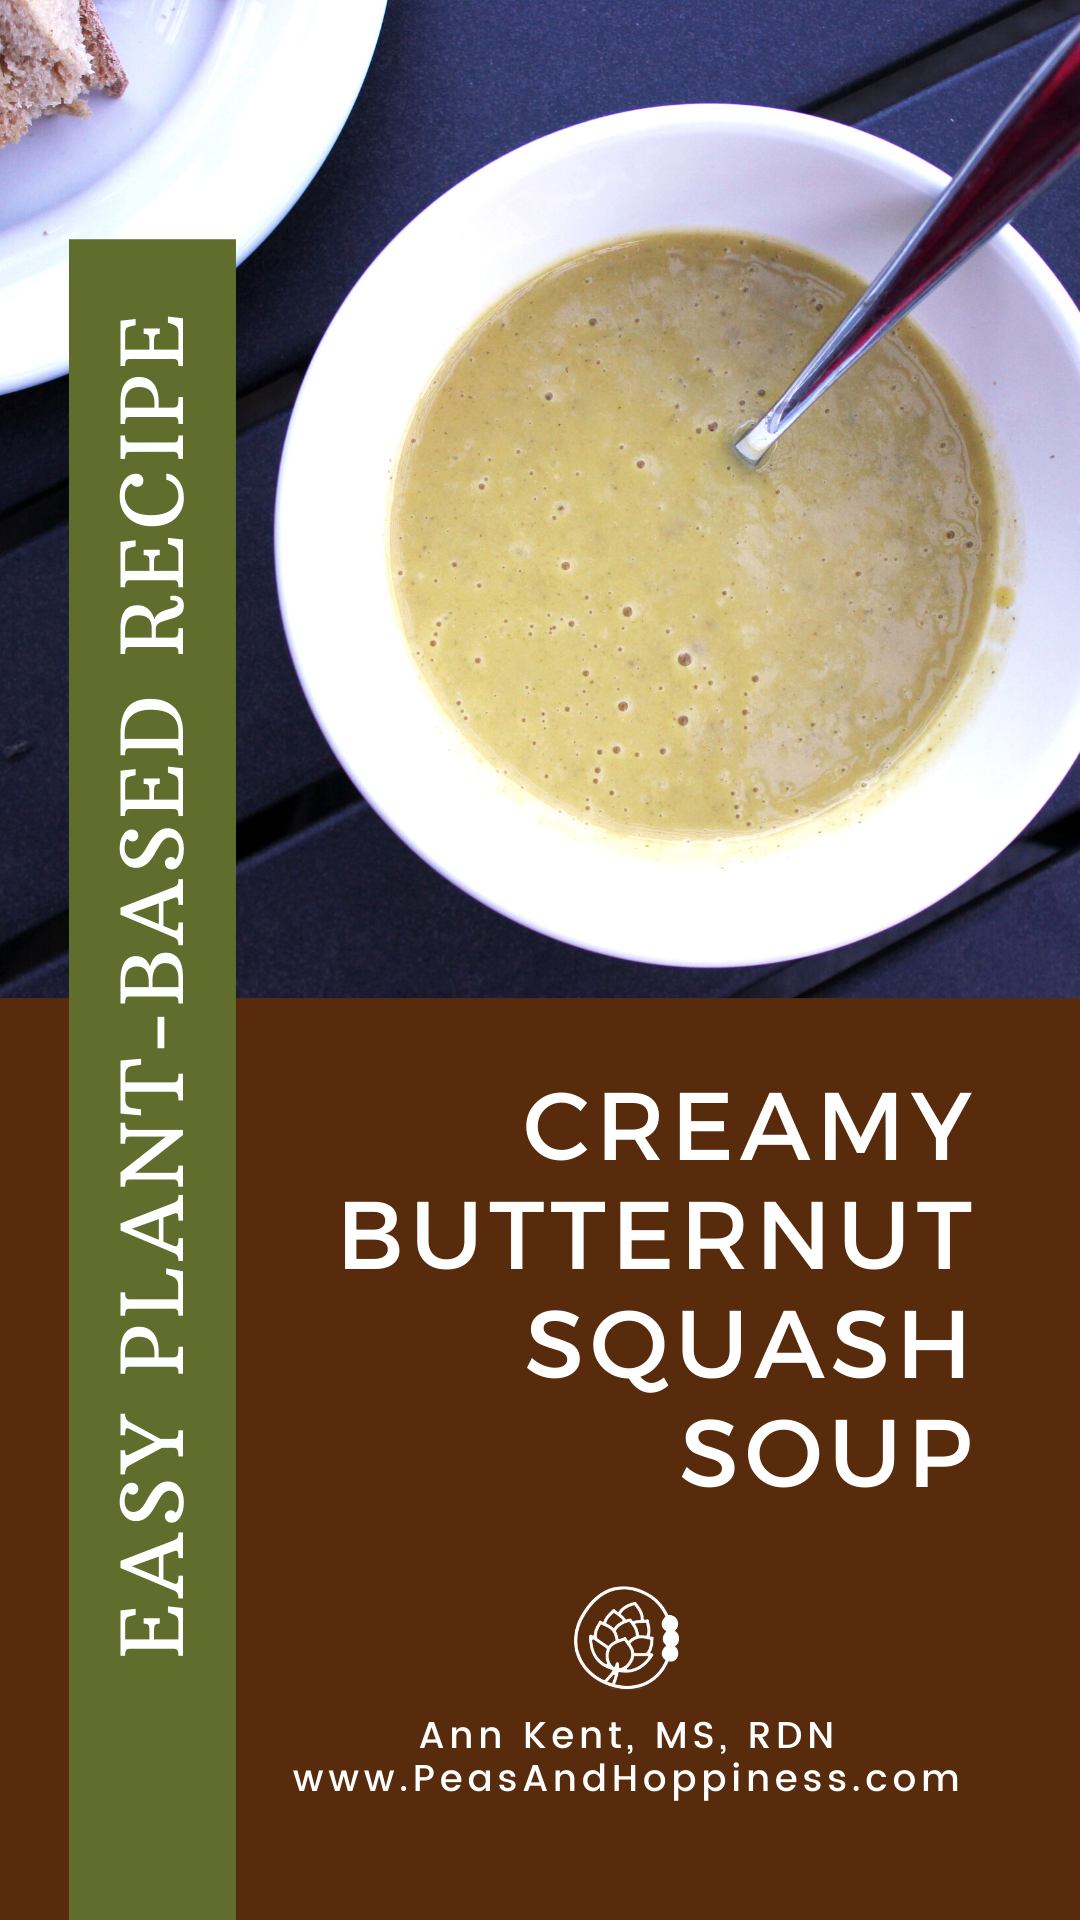 Creamy butternut Squash Soup - Easy Plant-Based Recipe from Peas and Hoppiness